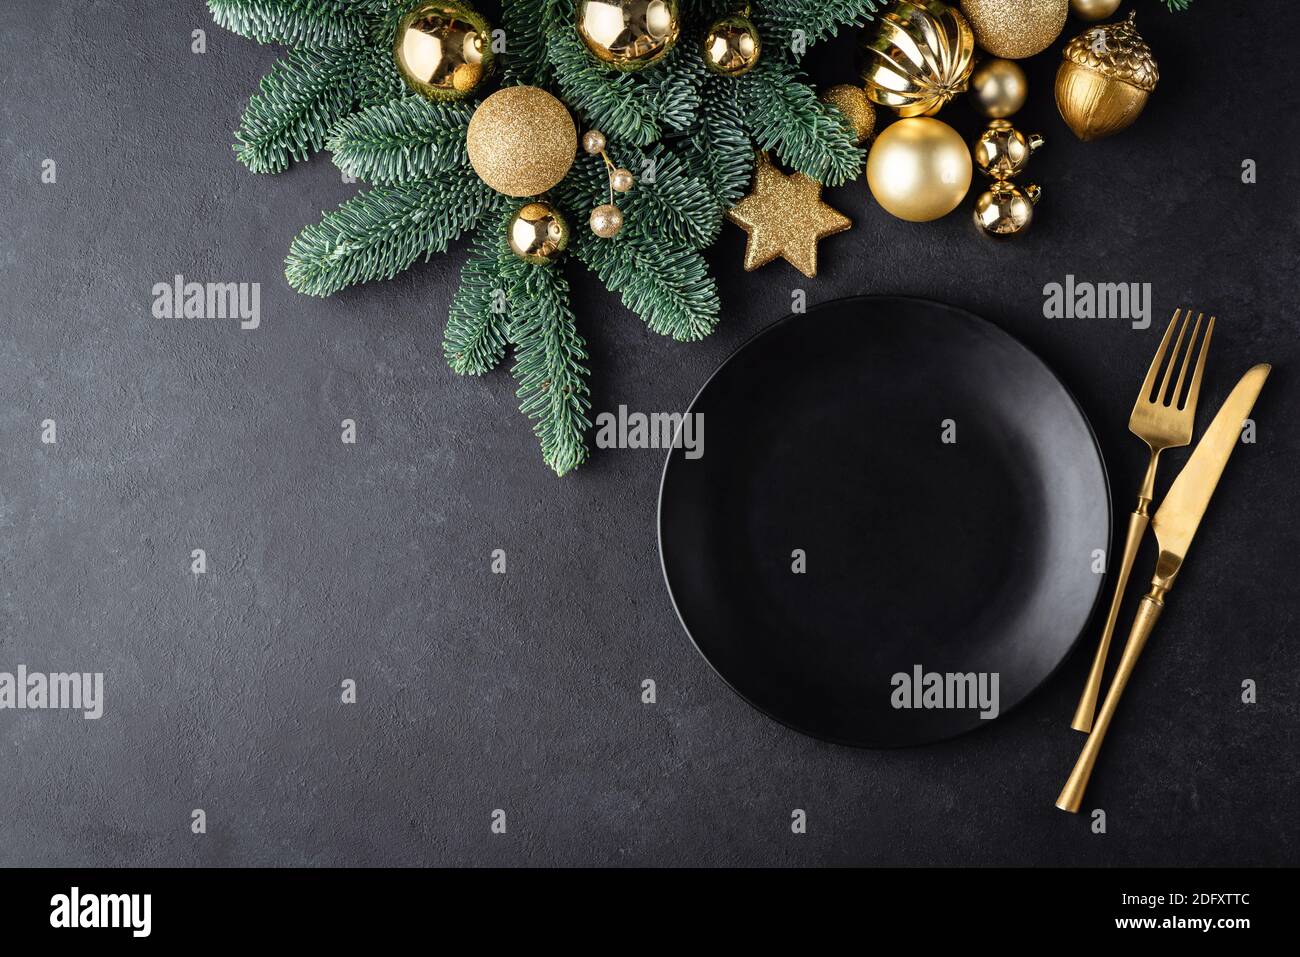 Christmas or New Year table setting background with black plate and golden color cutlery. Top view with copy space for text, design elements, graphics Stock Photo